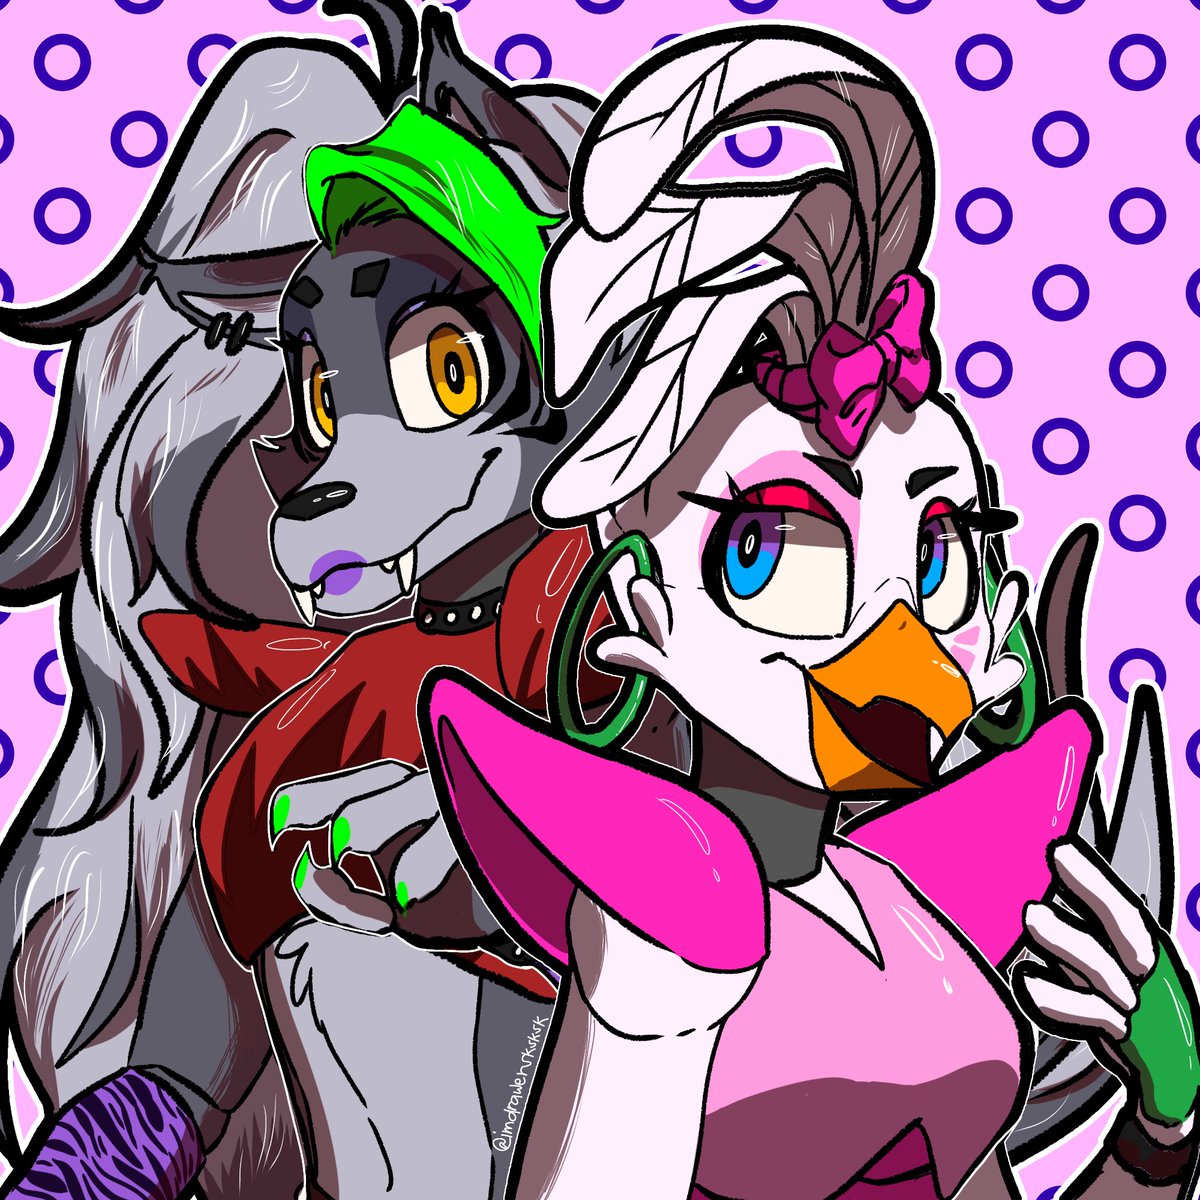 glanrock chica and roxanne #FNAF #fnafsecuritybreach #securitybreach #FiveN...